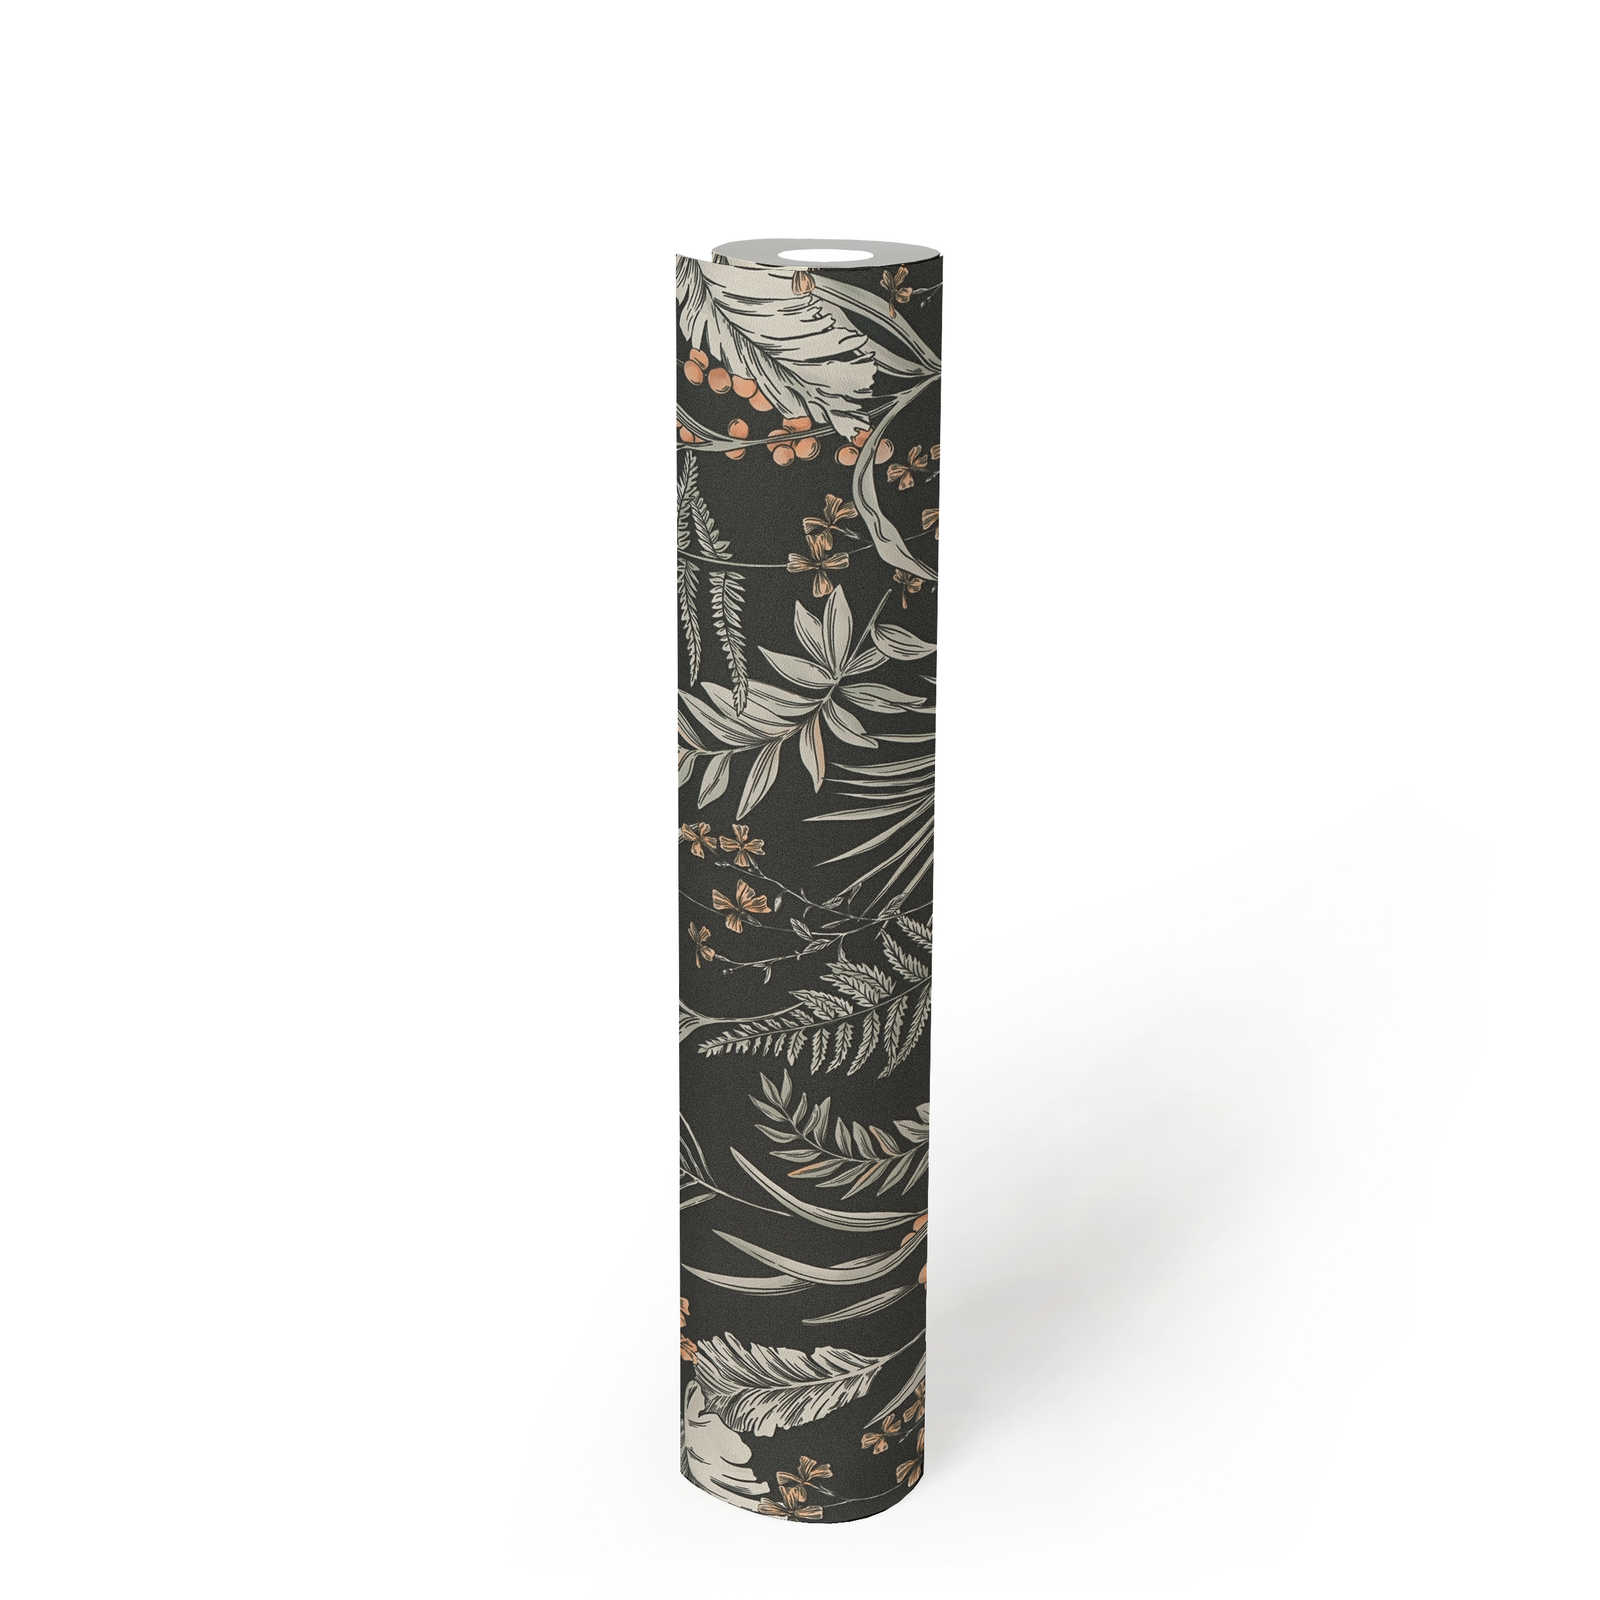             Floral wallpaper in modern style with flowers & leaves textured - Black, White, Orange
        